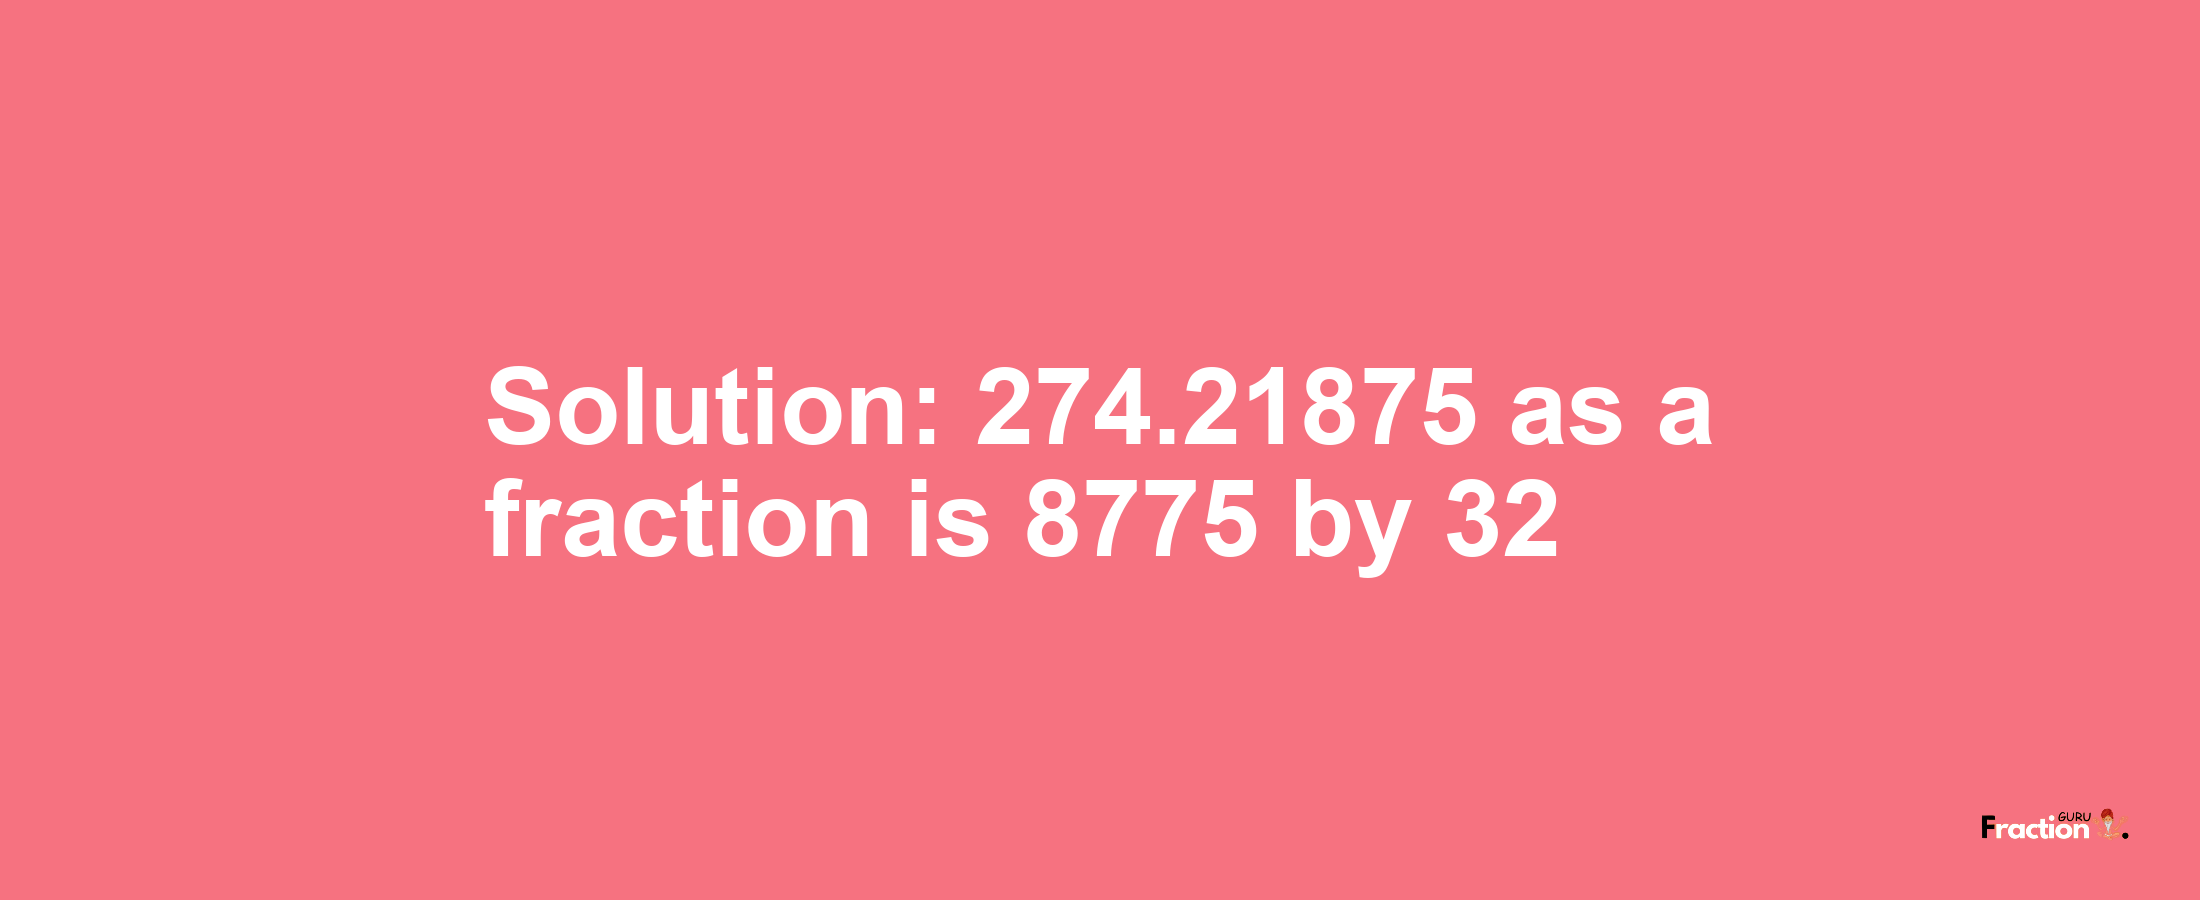 Solution:274.21875 as a fraction is 8775/32